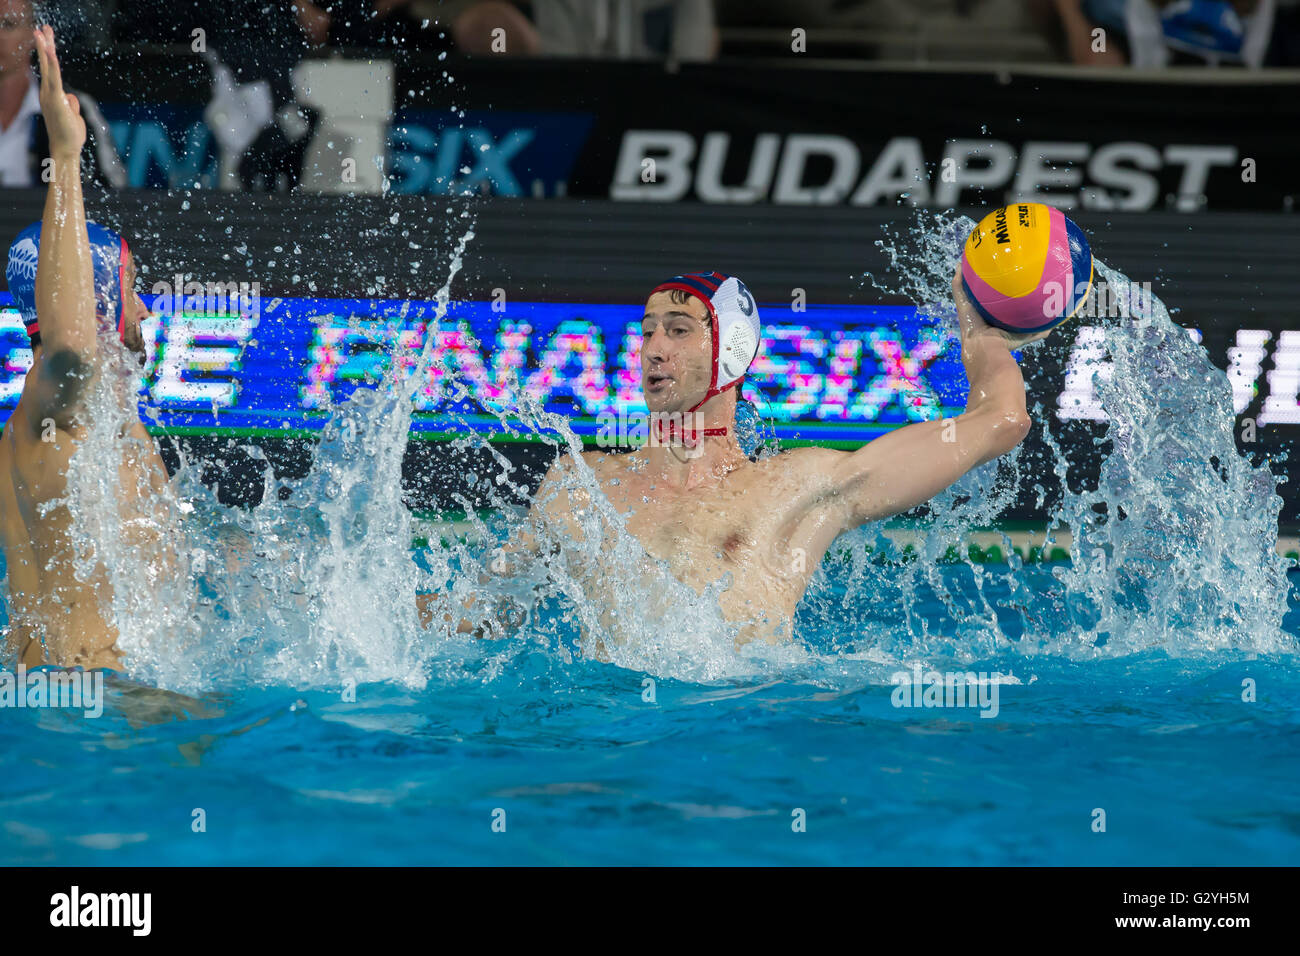 Budapest, Hungary. 4th June, 2016. Maro Jokovic (R) of Jug Dubrovnik team  of Croatia competes during the final of the LEN Waterpolo Champions League Final  Six competition in Budapest, Hungary, June 4,